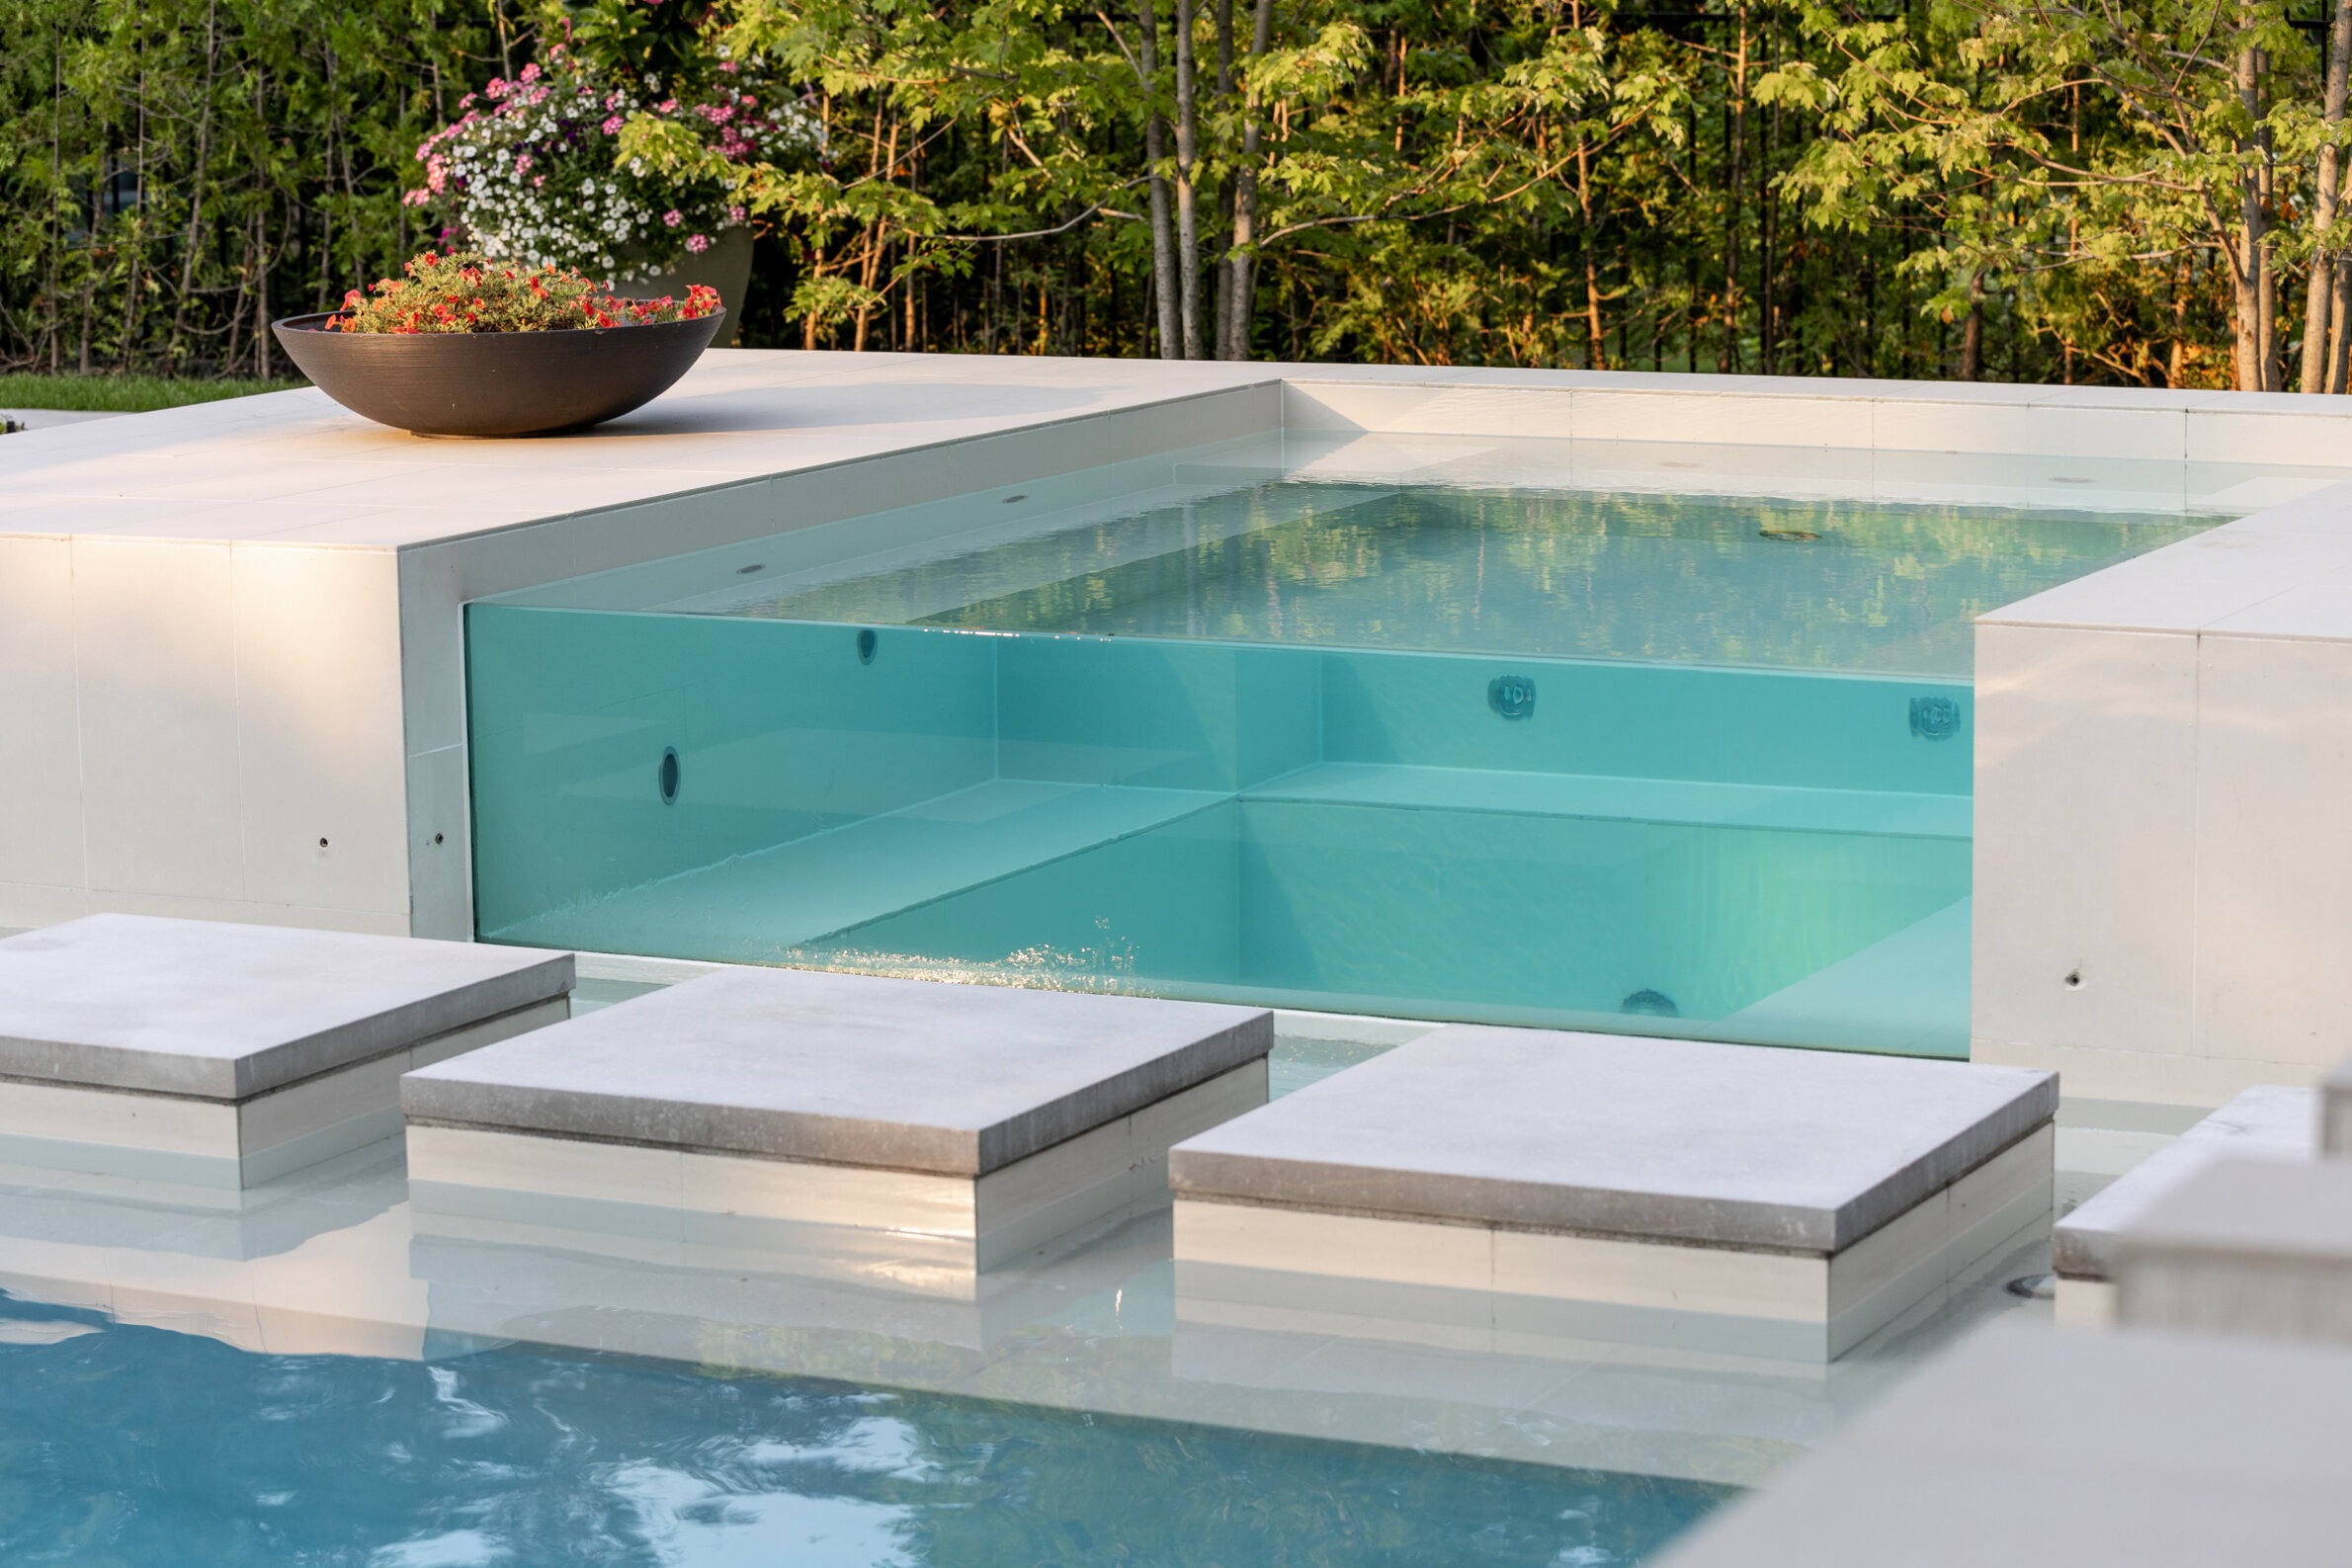 A modern outdoor swimming pool with clear blue water, surrounded by white decking and stepping stones, adjacent to a lush green backdrop.